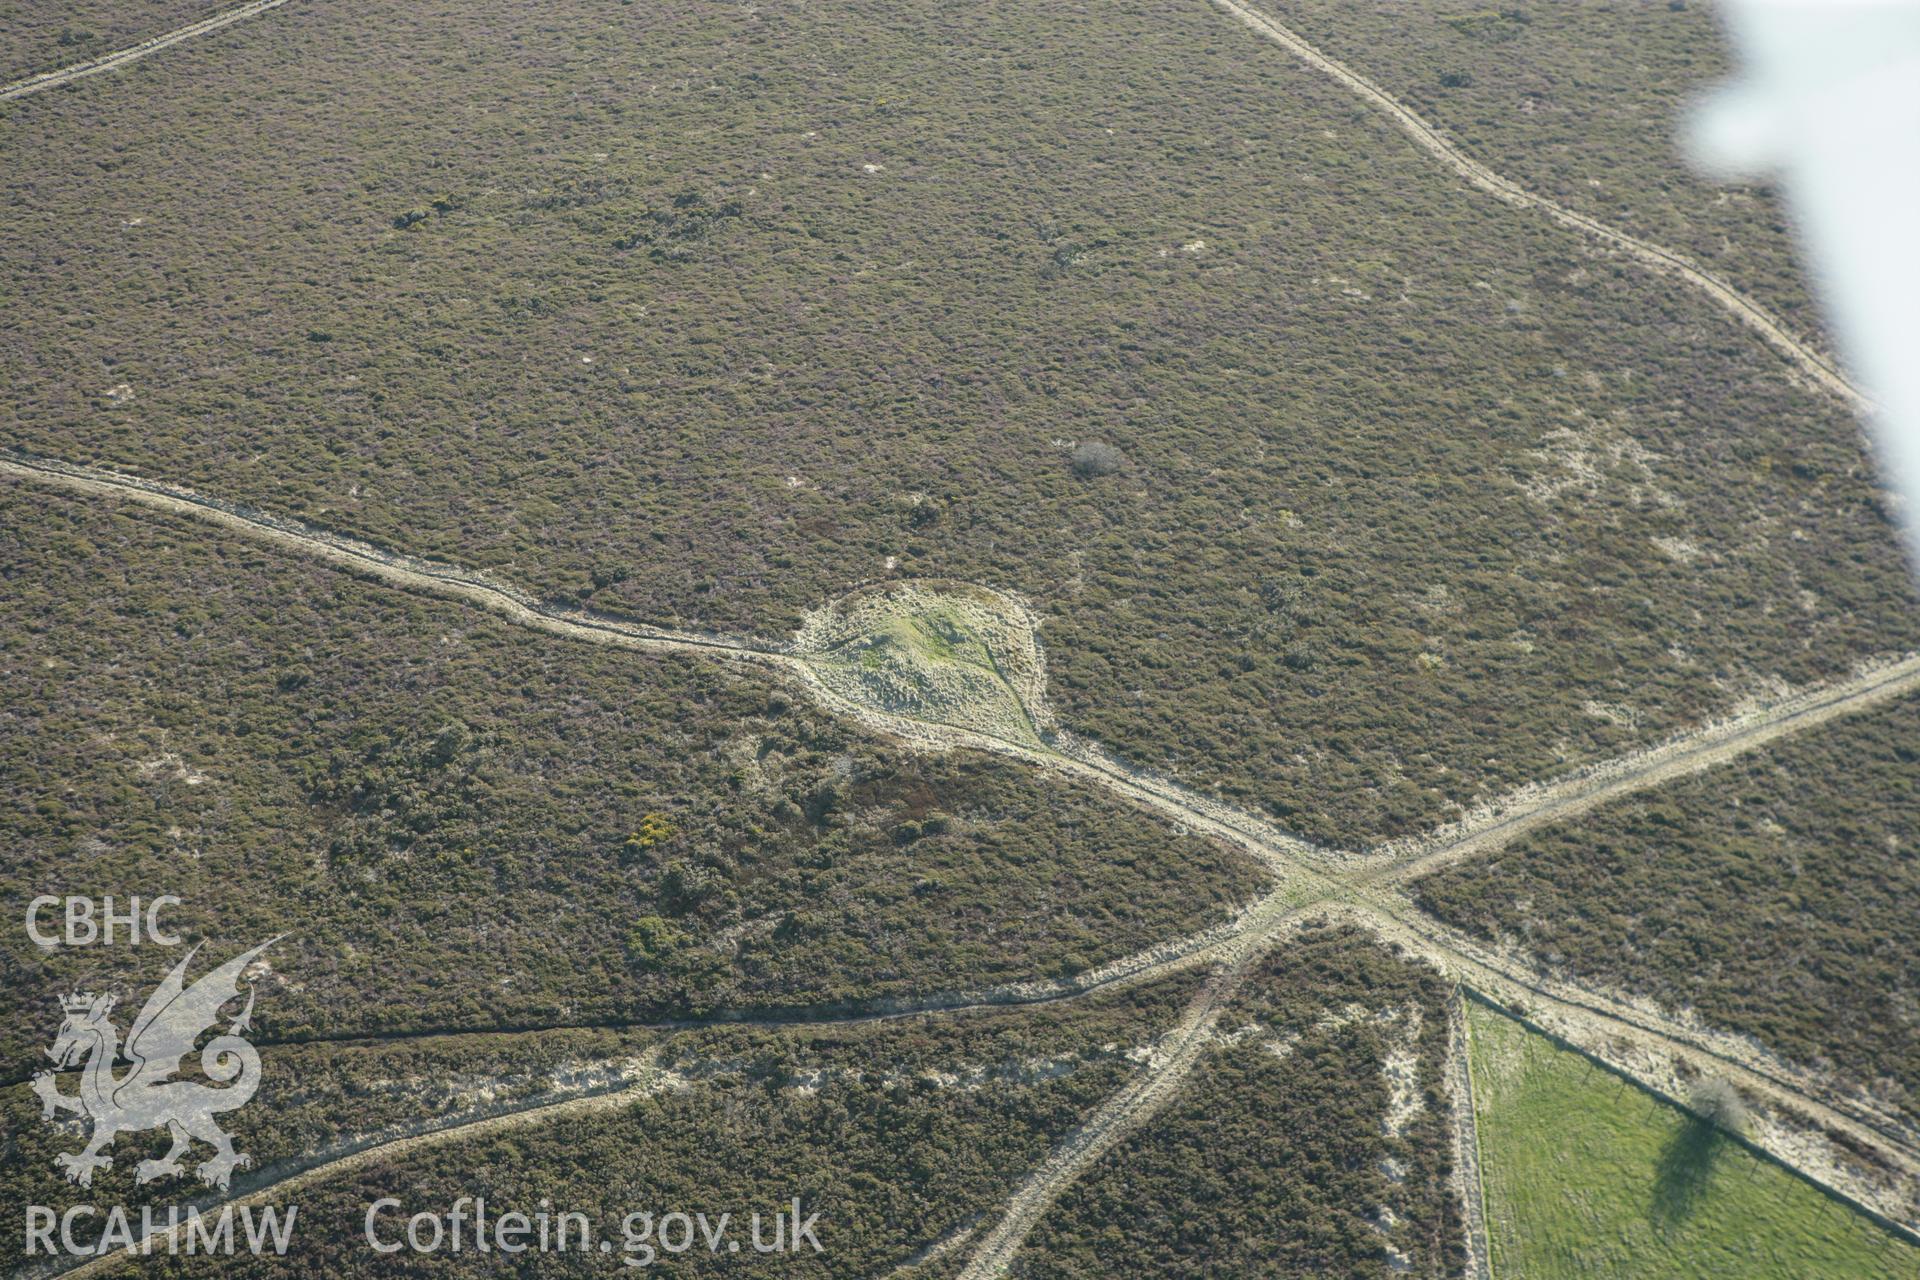 RCAHMW colour oblique aerial photograph of Freni-Fach Barrow. Taken on 13 April 2010 by Toby Driver